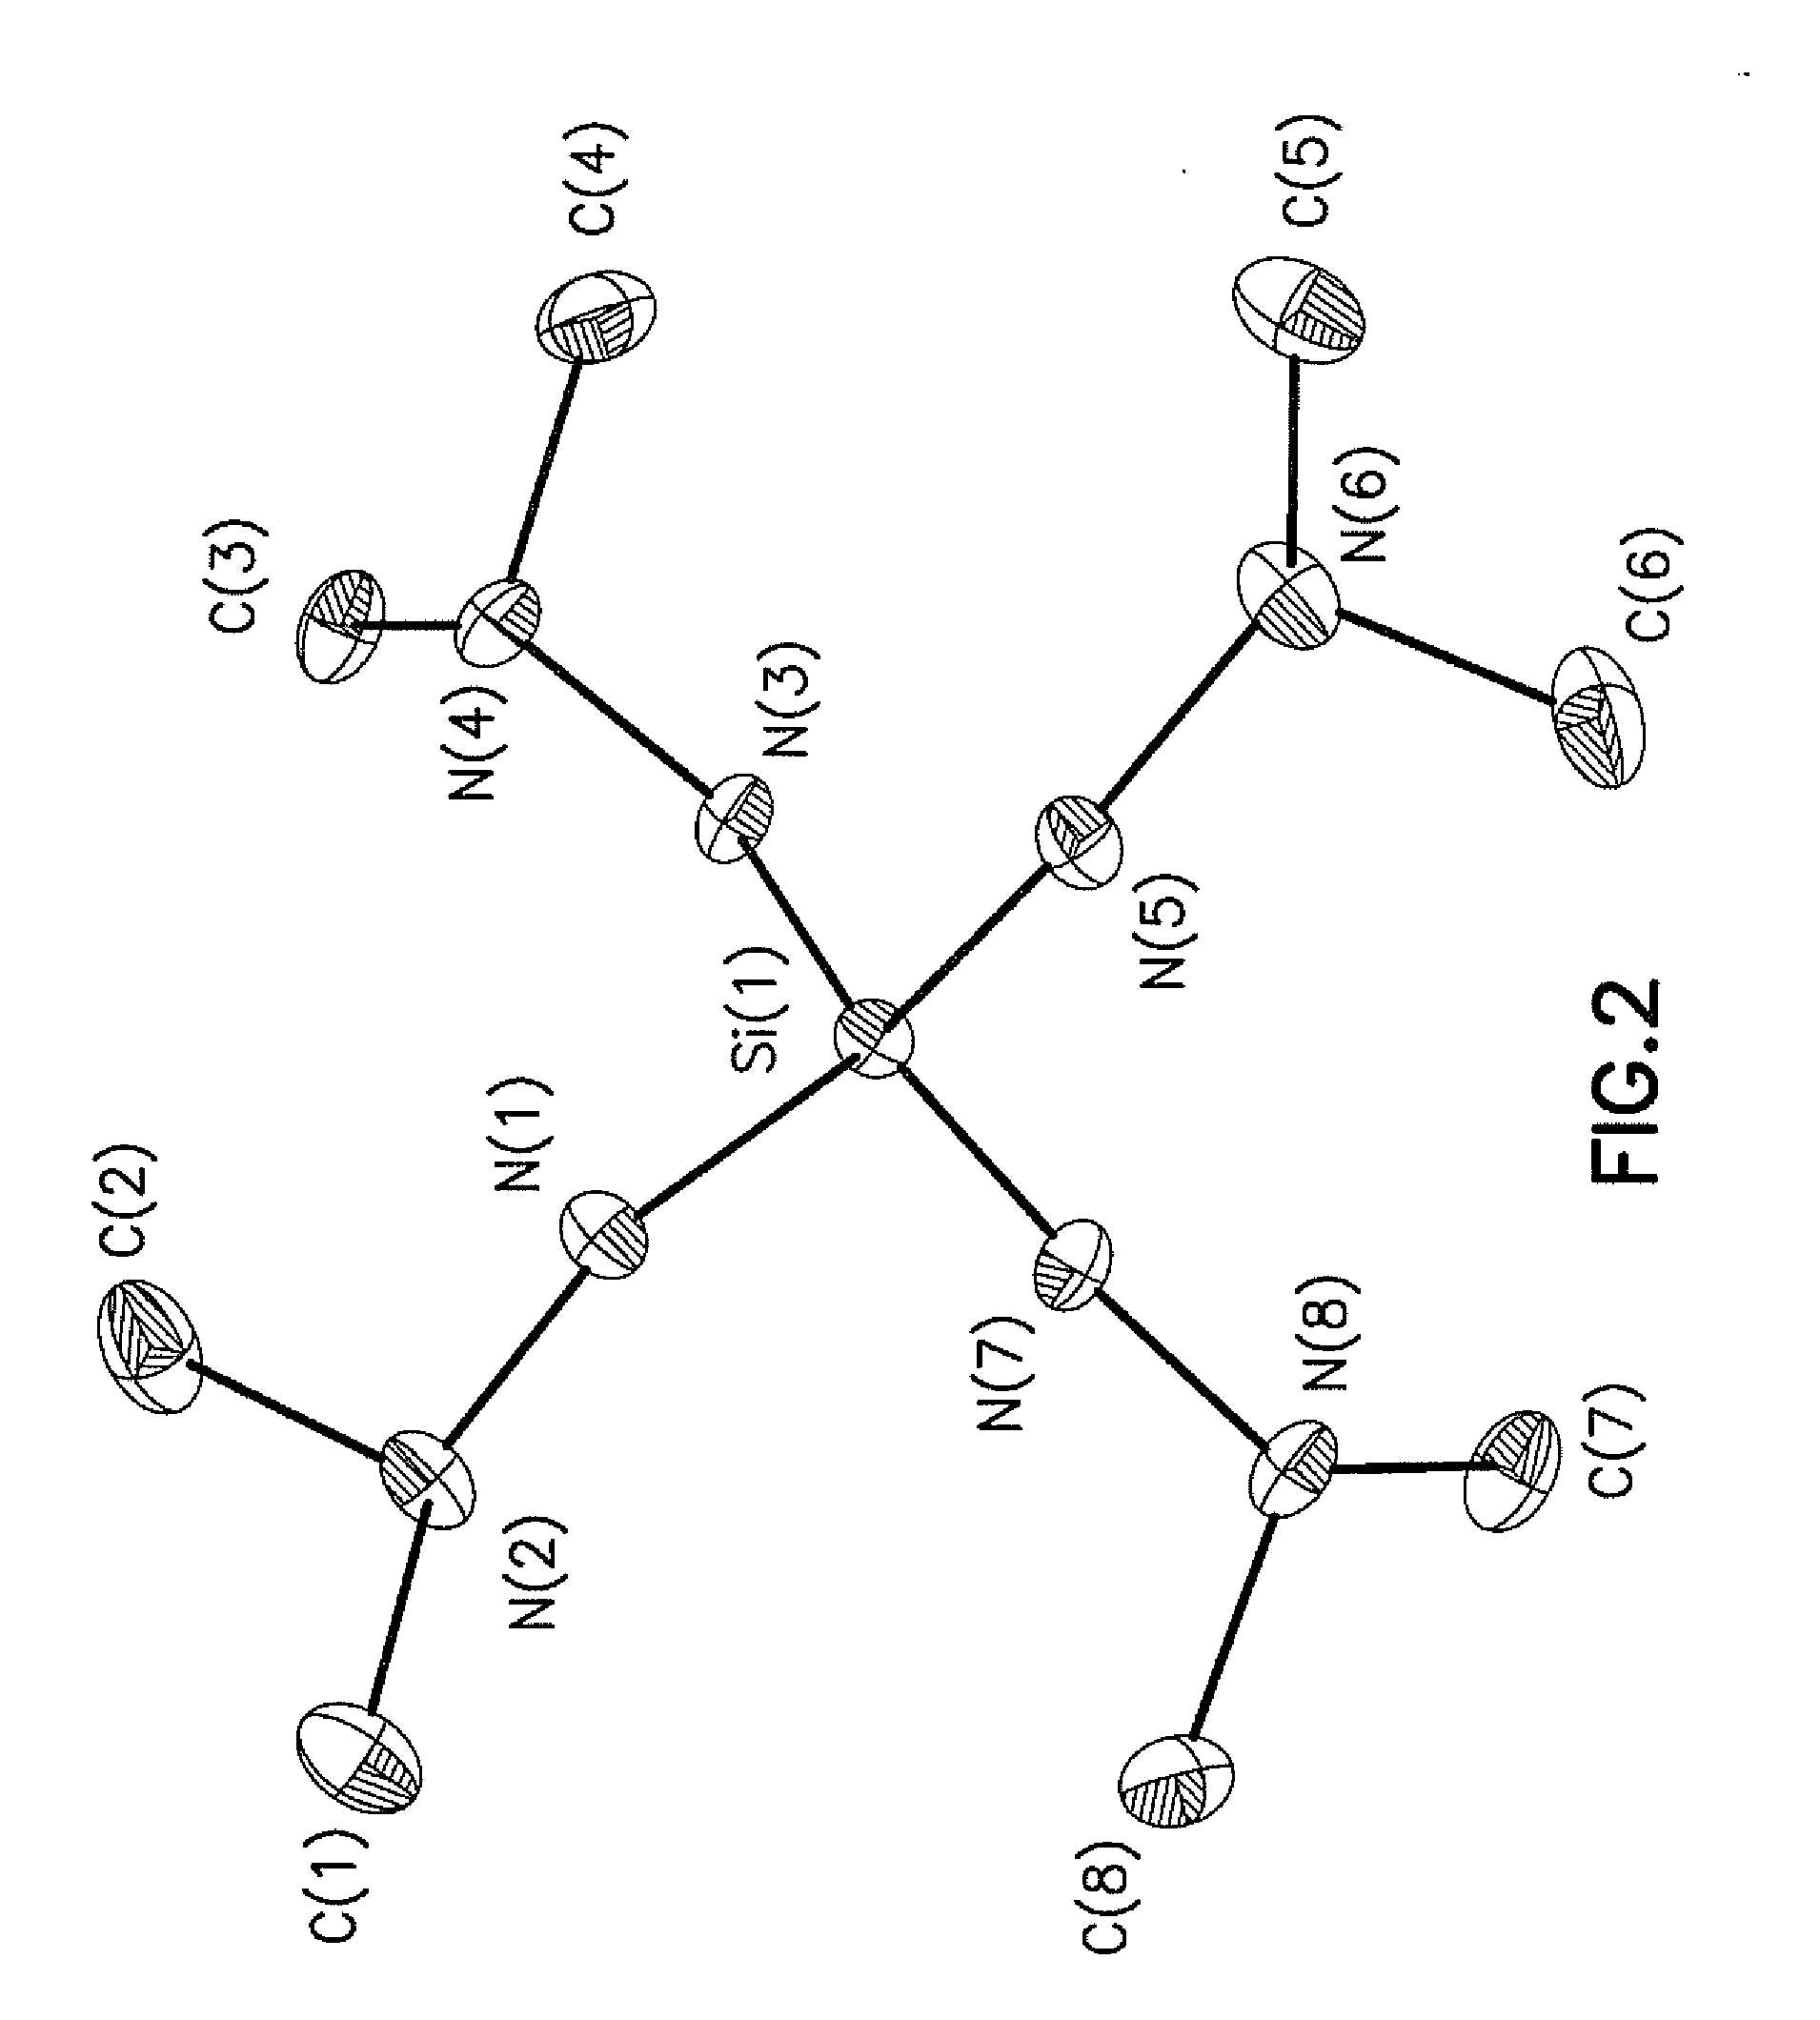 Monosilane or disilane derivatives and method for low temperature deposition of silicon-containing films using the same